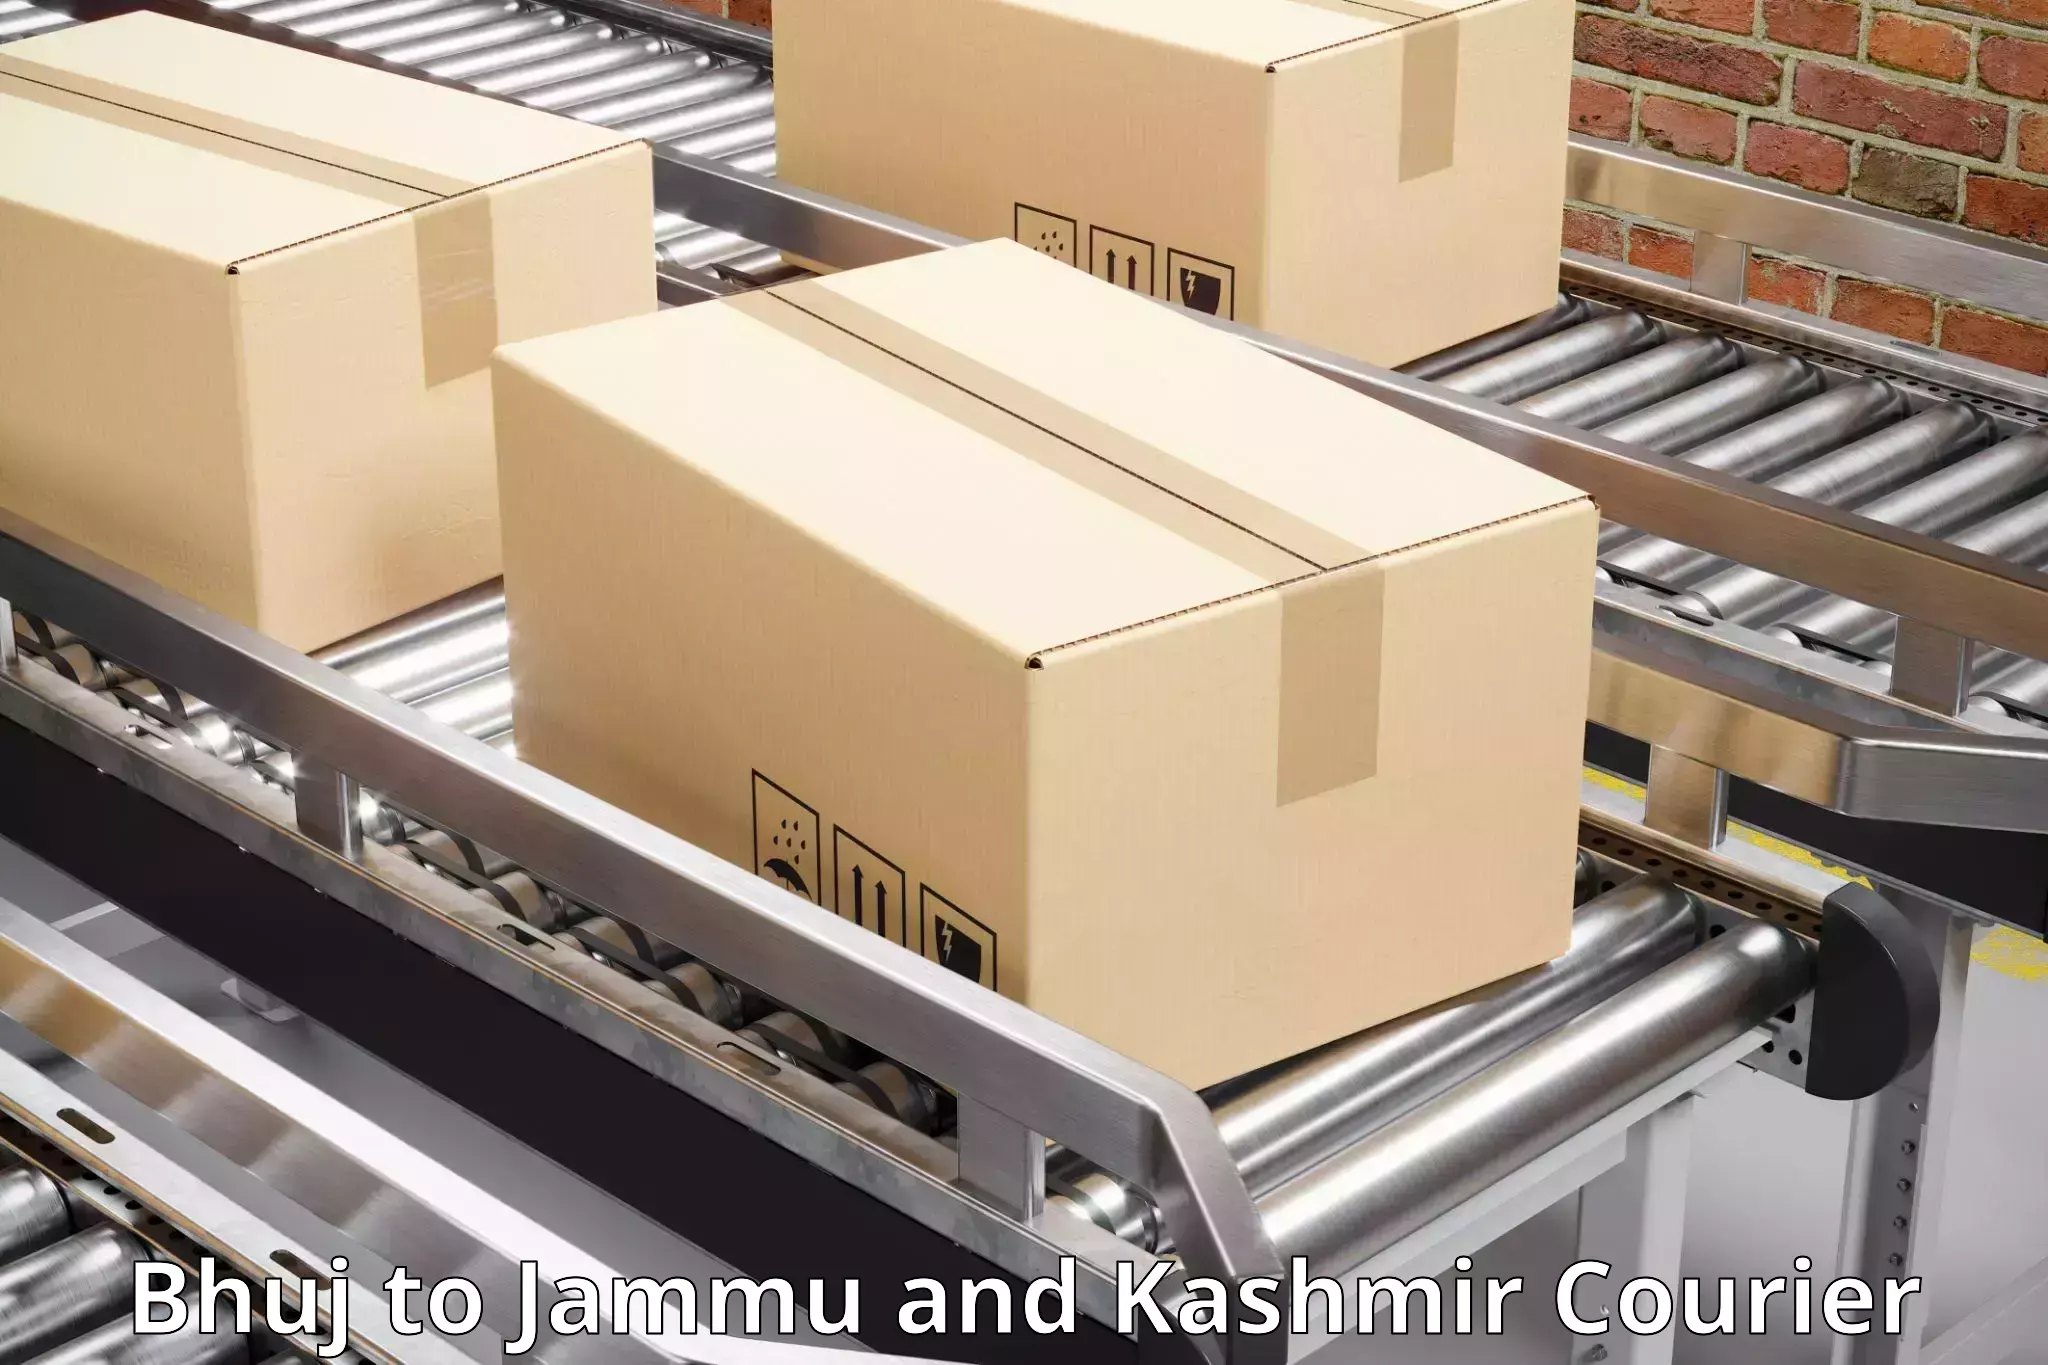 Same-day delivery solutions Bhuj to Jammu and Kashmir